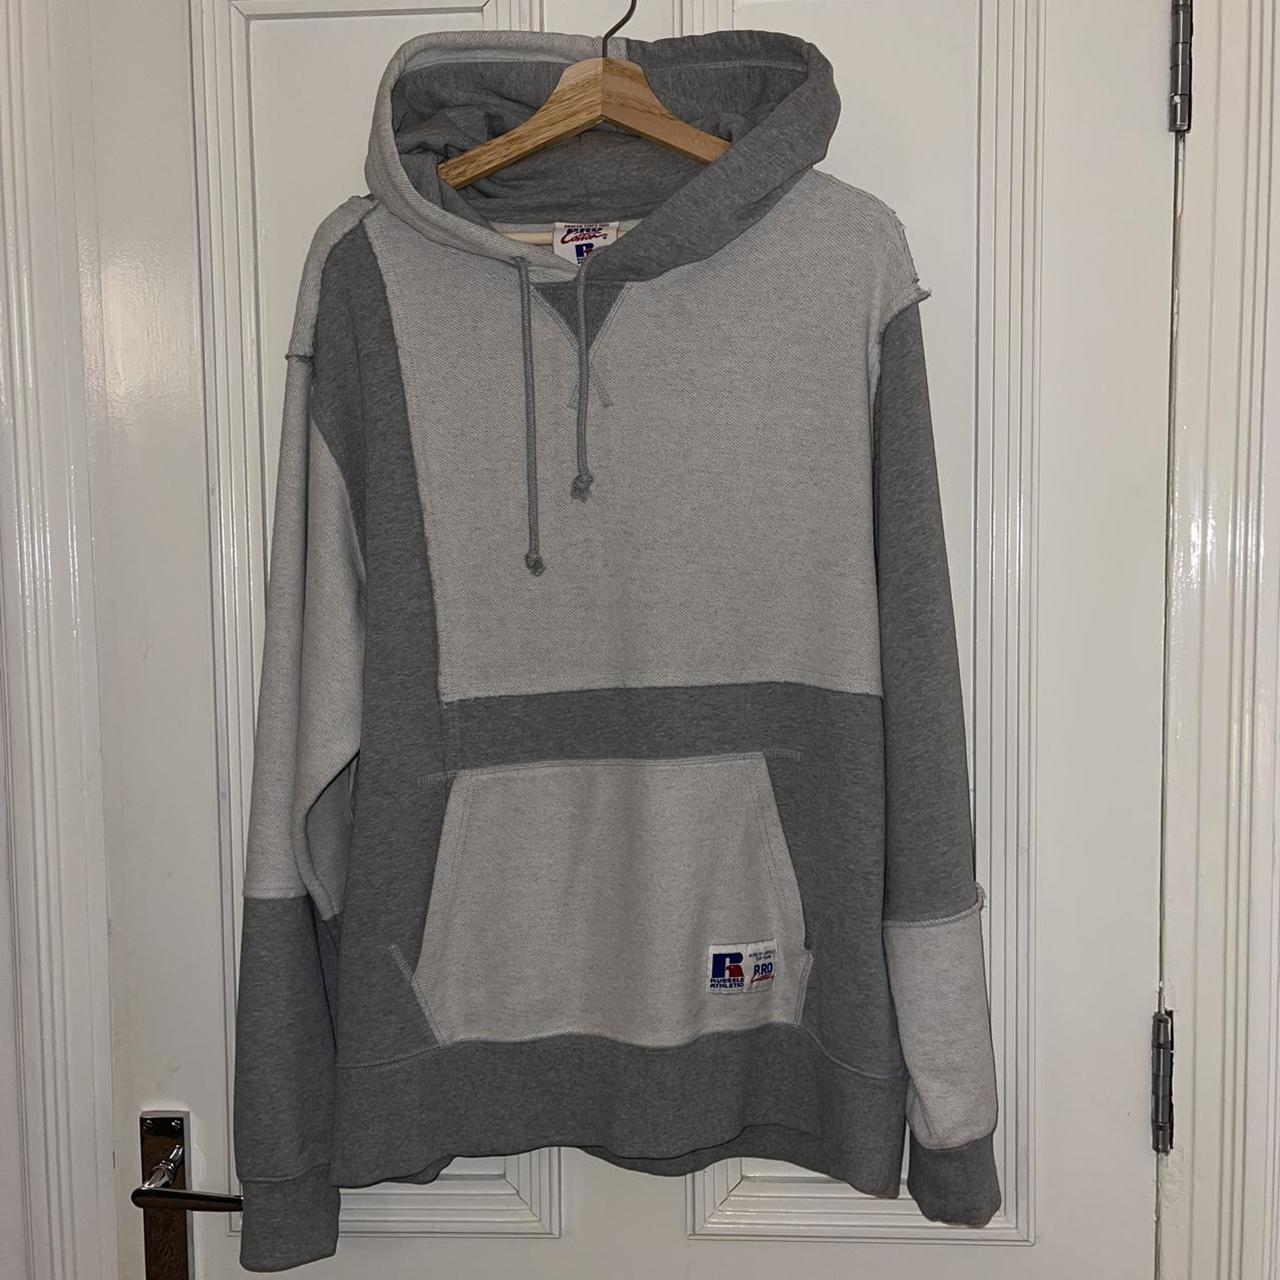 Russell Athletic grey patchwork hoodie, size... - Depop